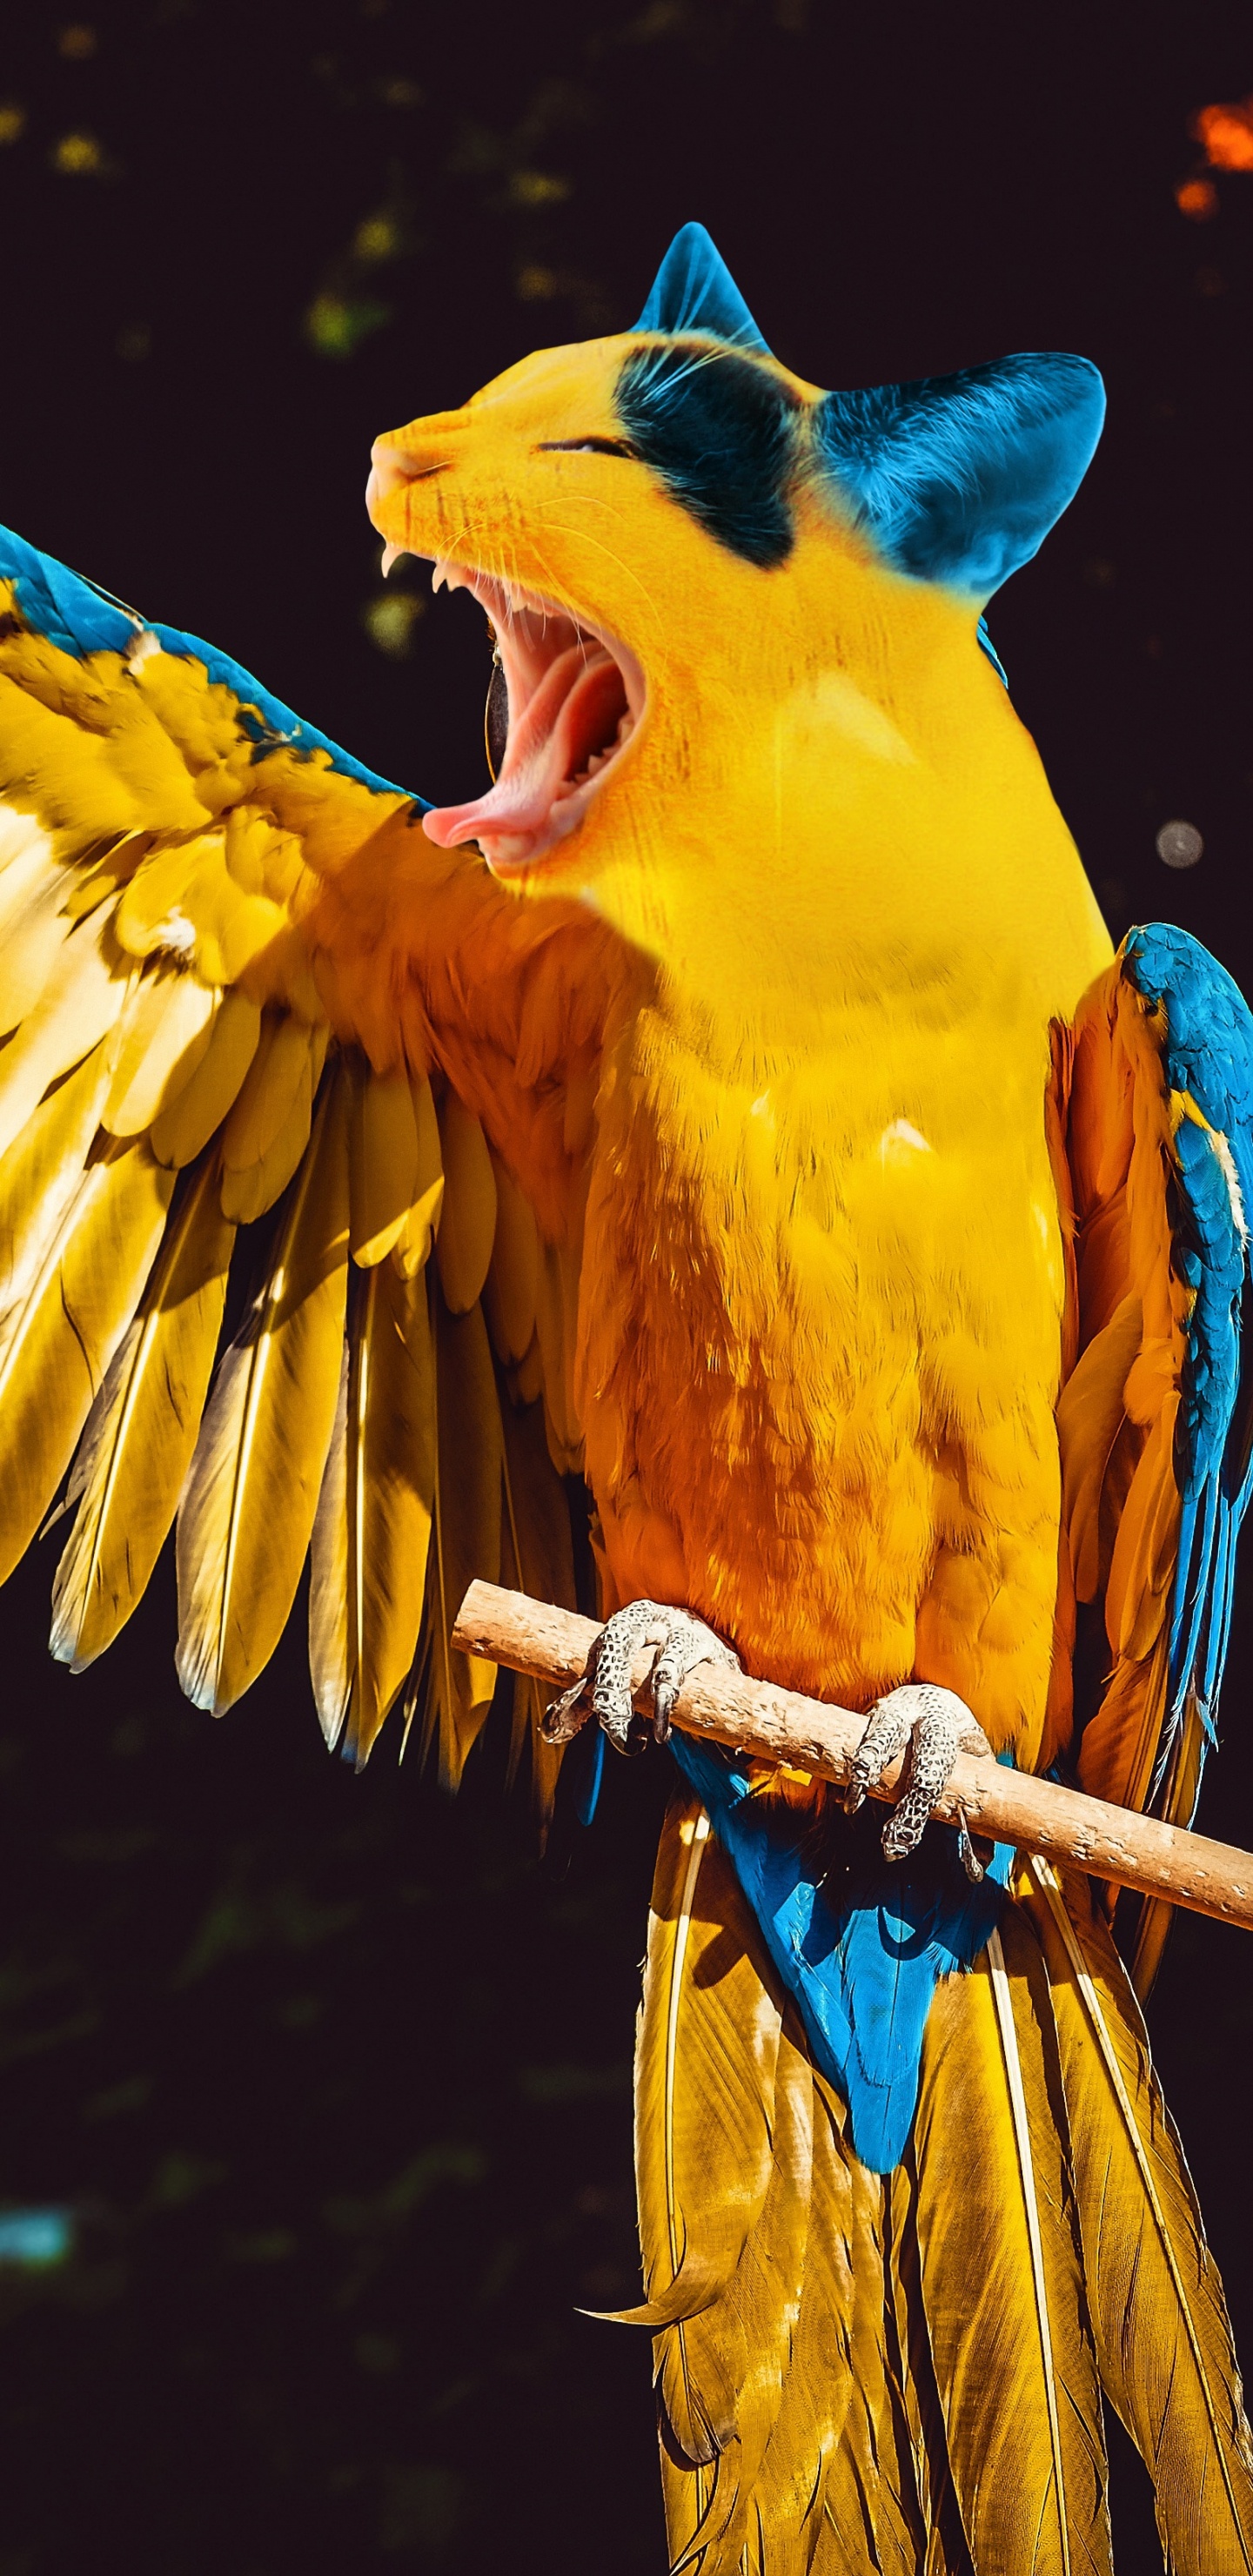 Yellow Blue and Orange Parrot. Wallpaper in 1440x2960 Resolution